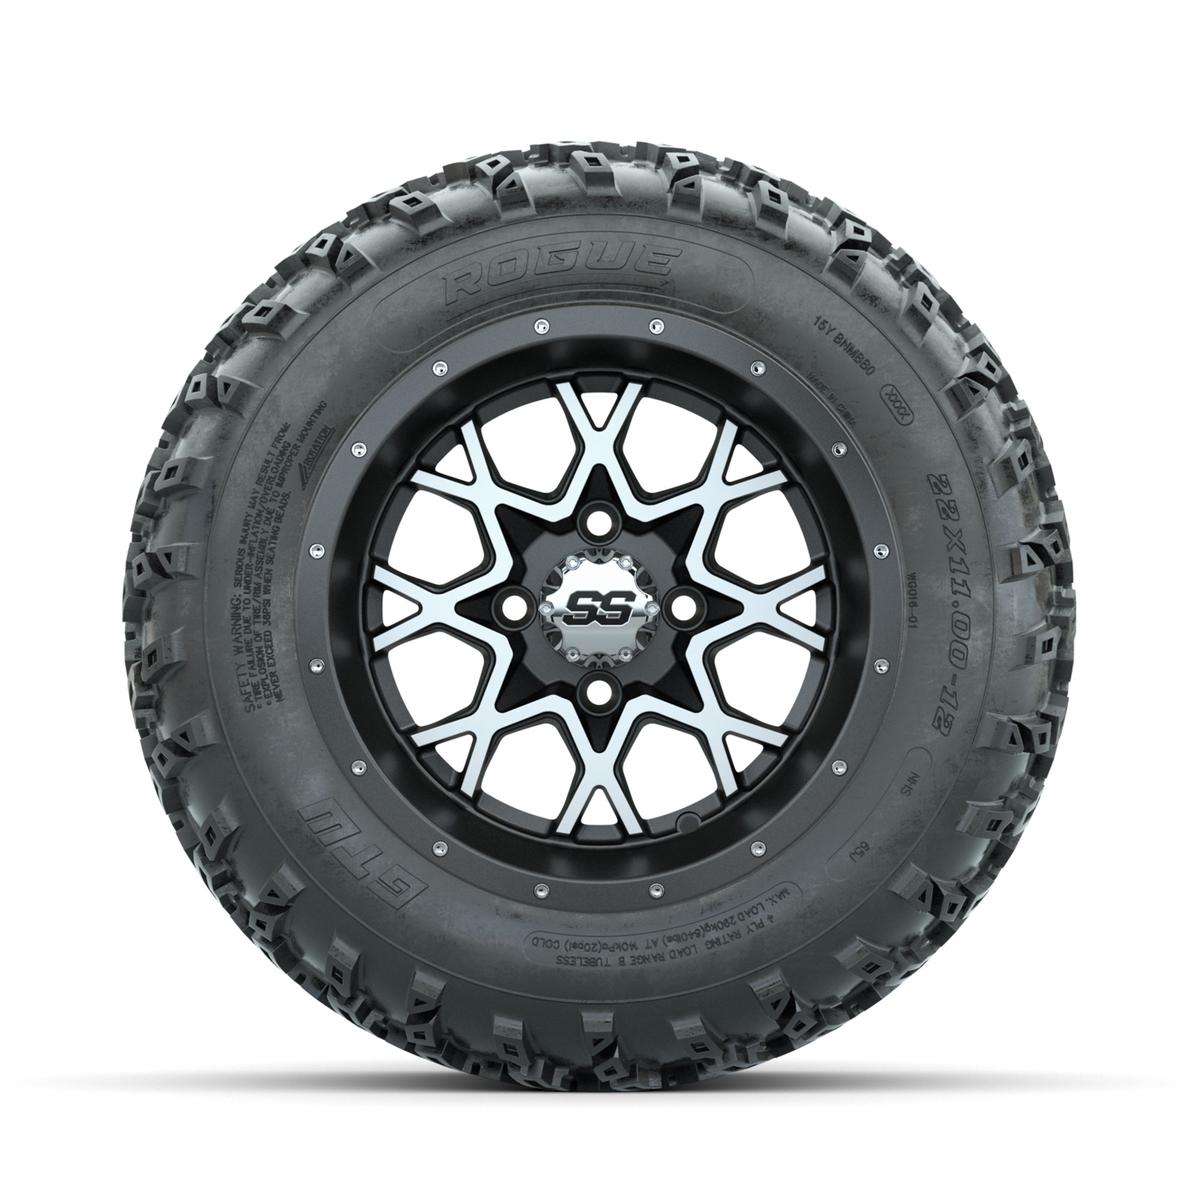 GTW Vortex Machined/Matte Grey 12 in Wheels with 22x11.00-12 Rogue All Terrain Tires – Full Set